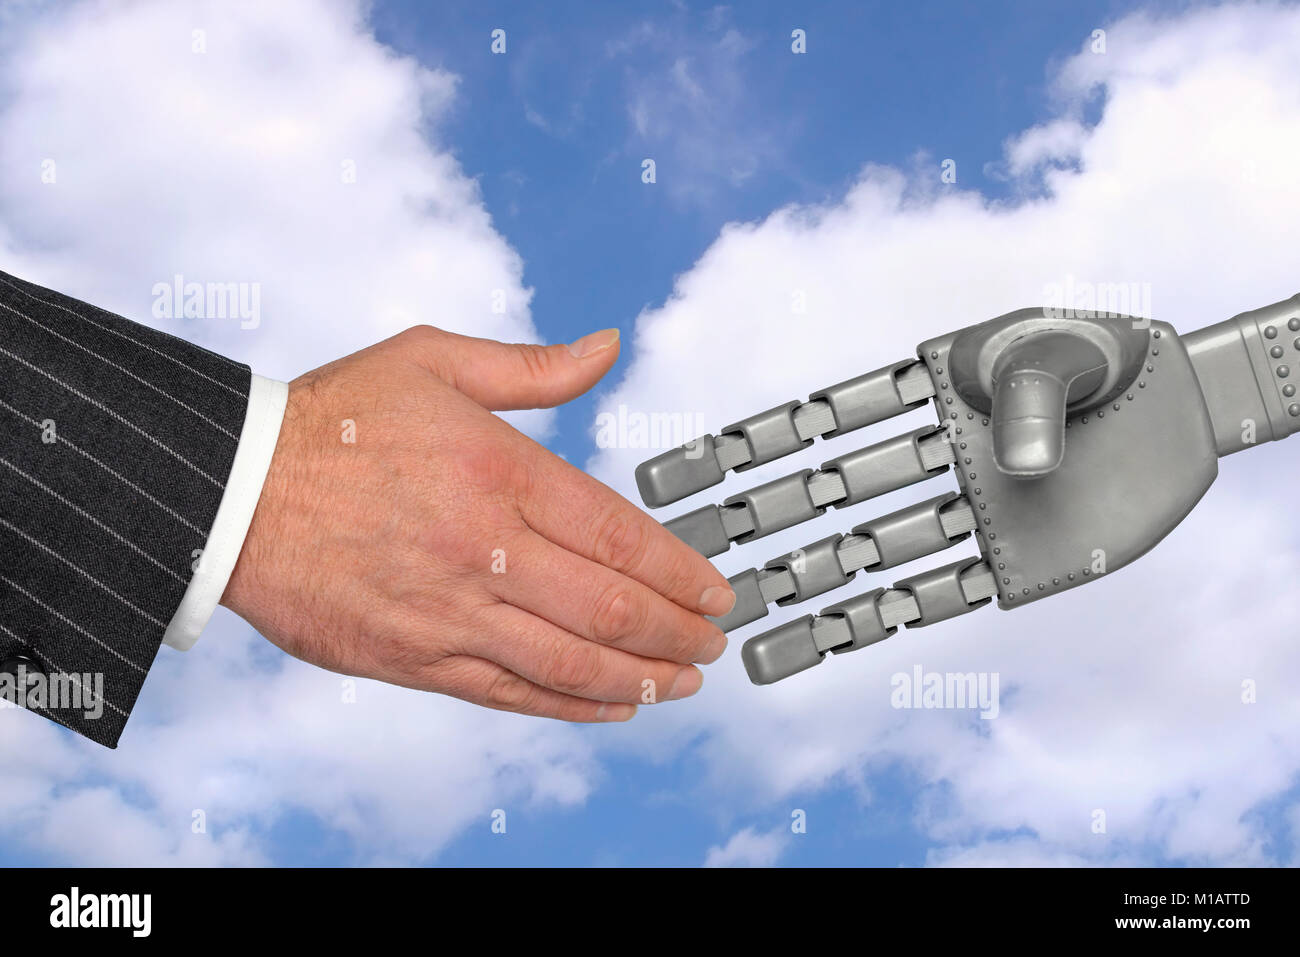 Handshake between a businessman and robotic hand, a meeting with technology concept. Stock Photo